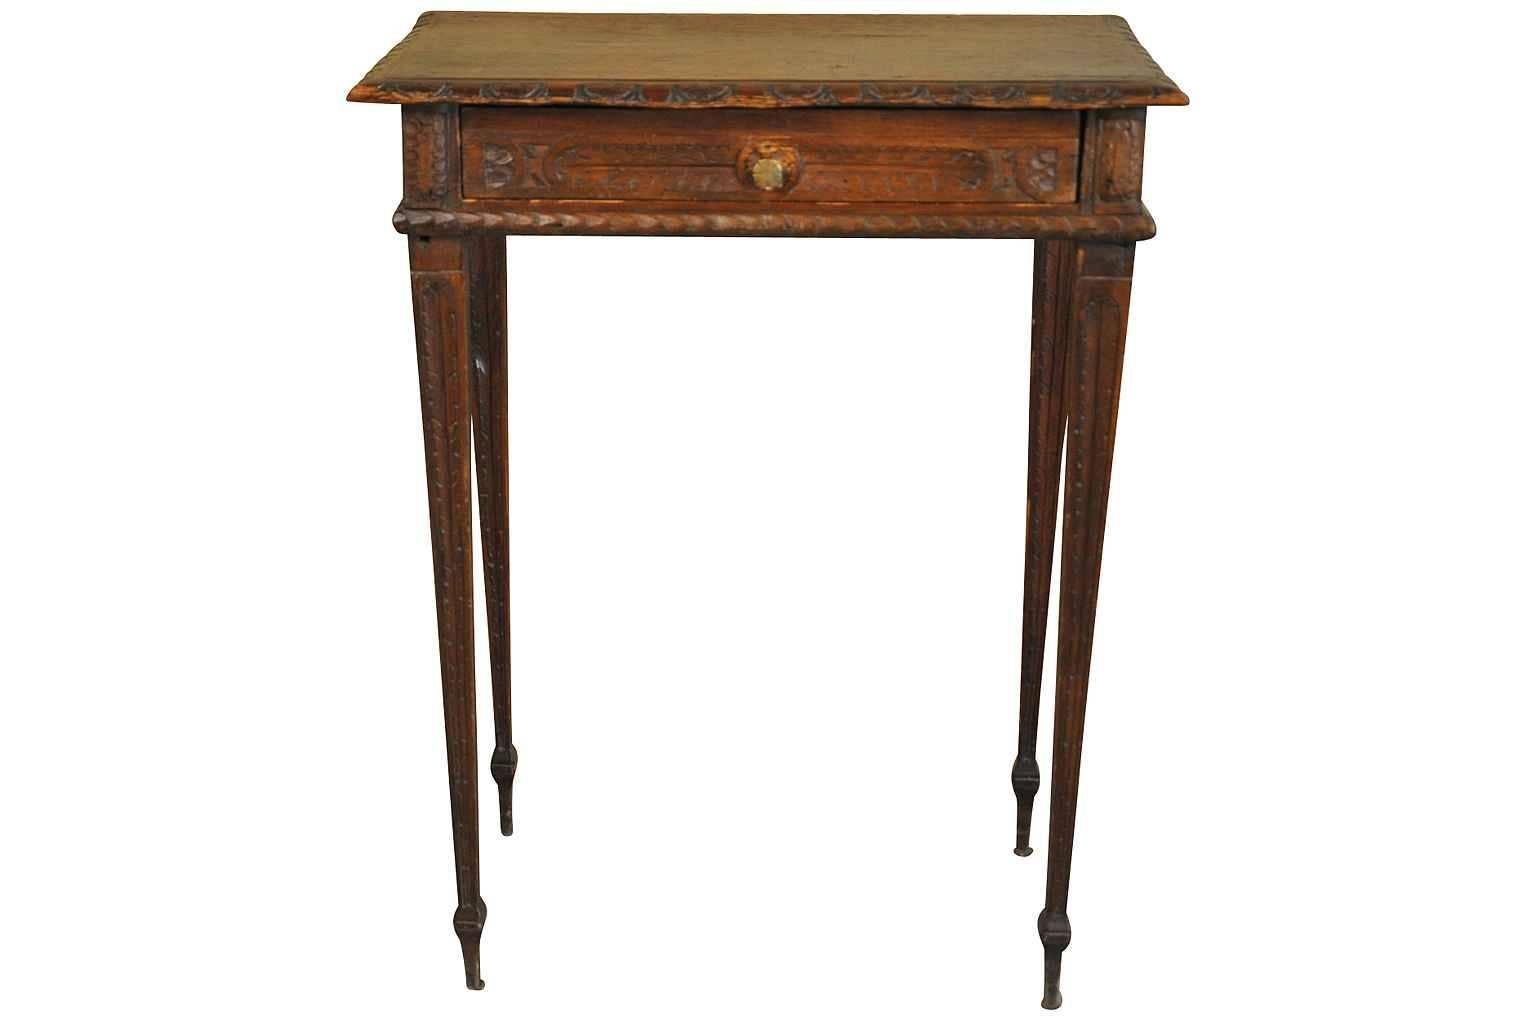 An absolutely charming French Louis XVI style side table or end table from France. Beautifully constructed in richly stained pine wood. Beautiful carved edge finish, one drawer over elegant tapered legs.